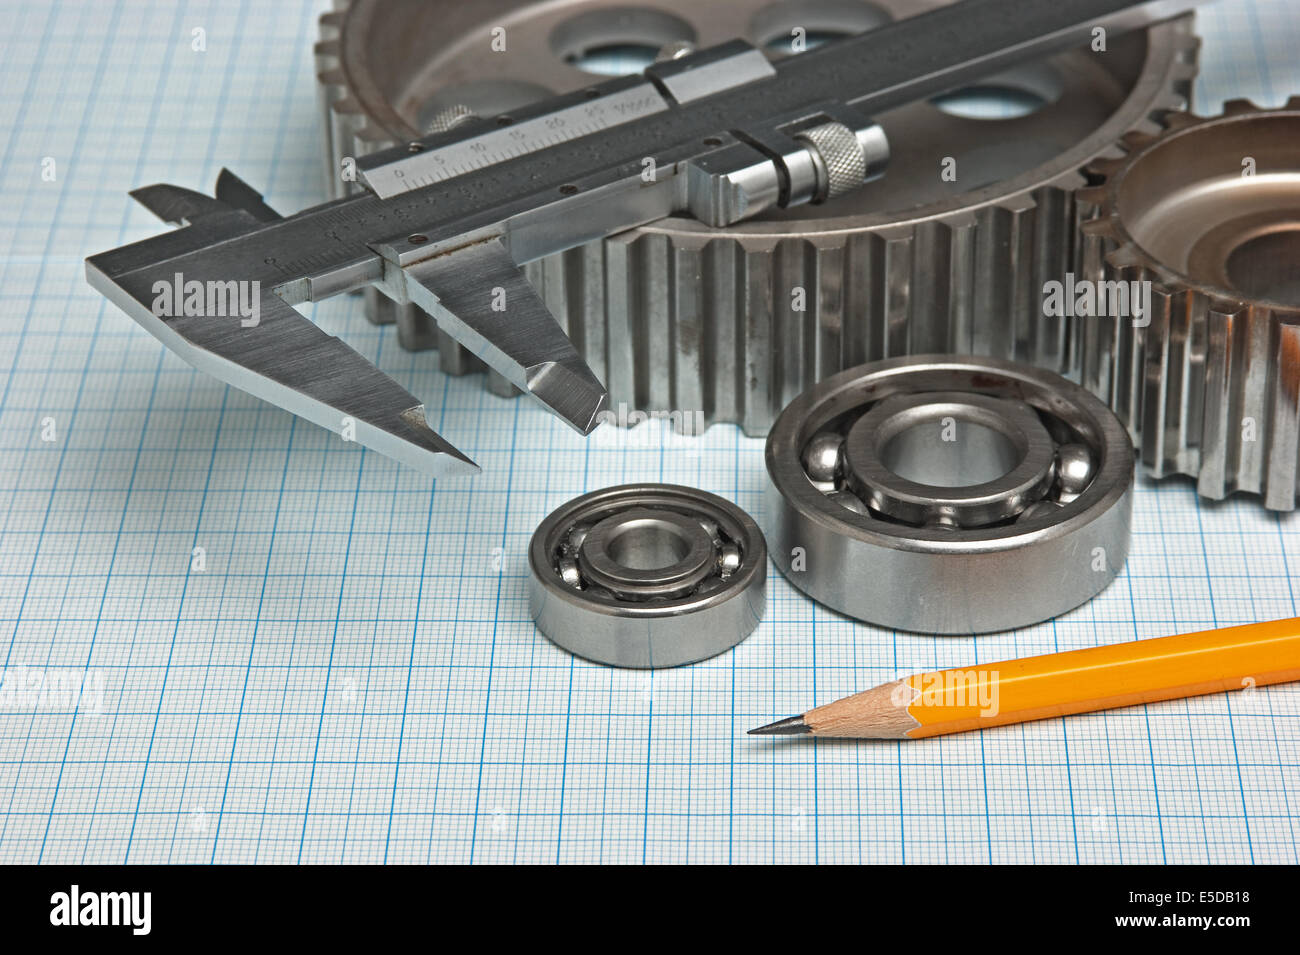 caliper with gears and bearings on graph paper Stock Photo